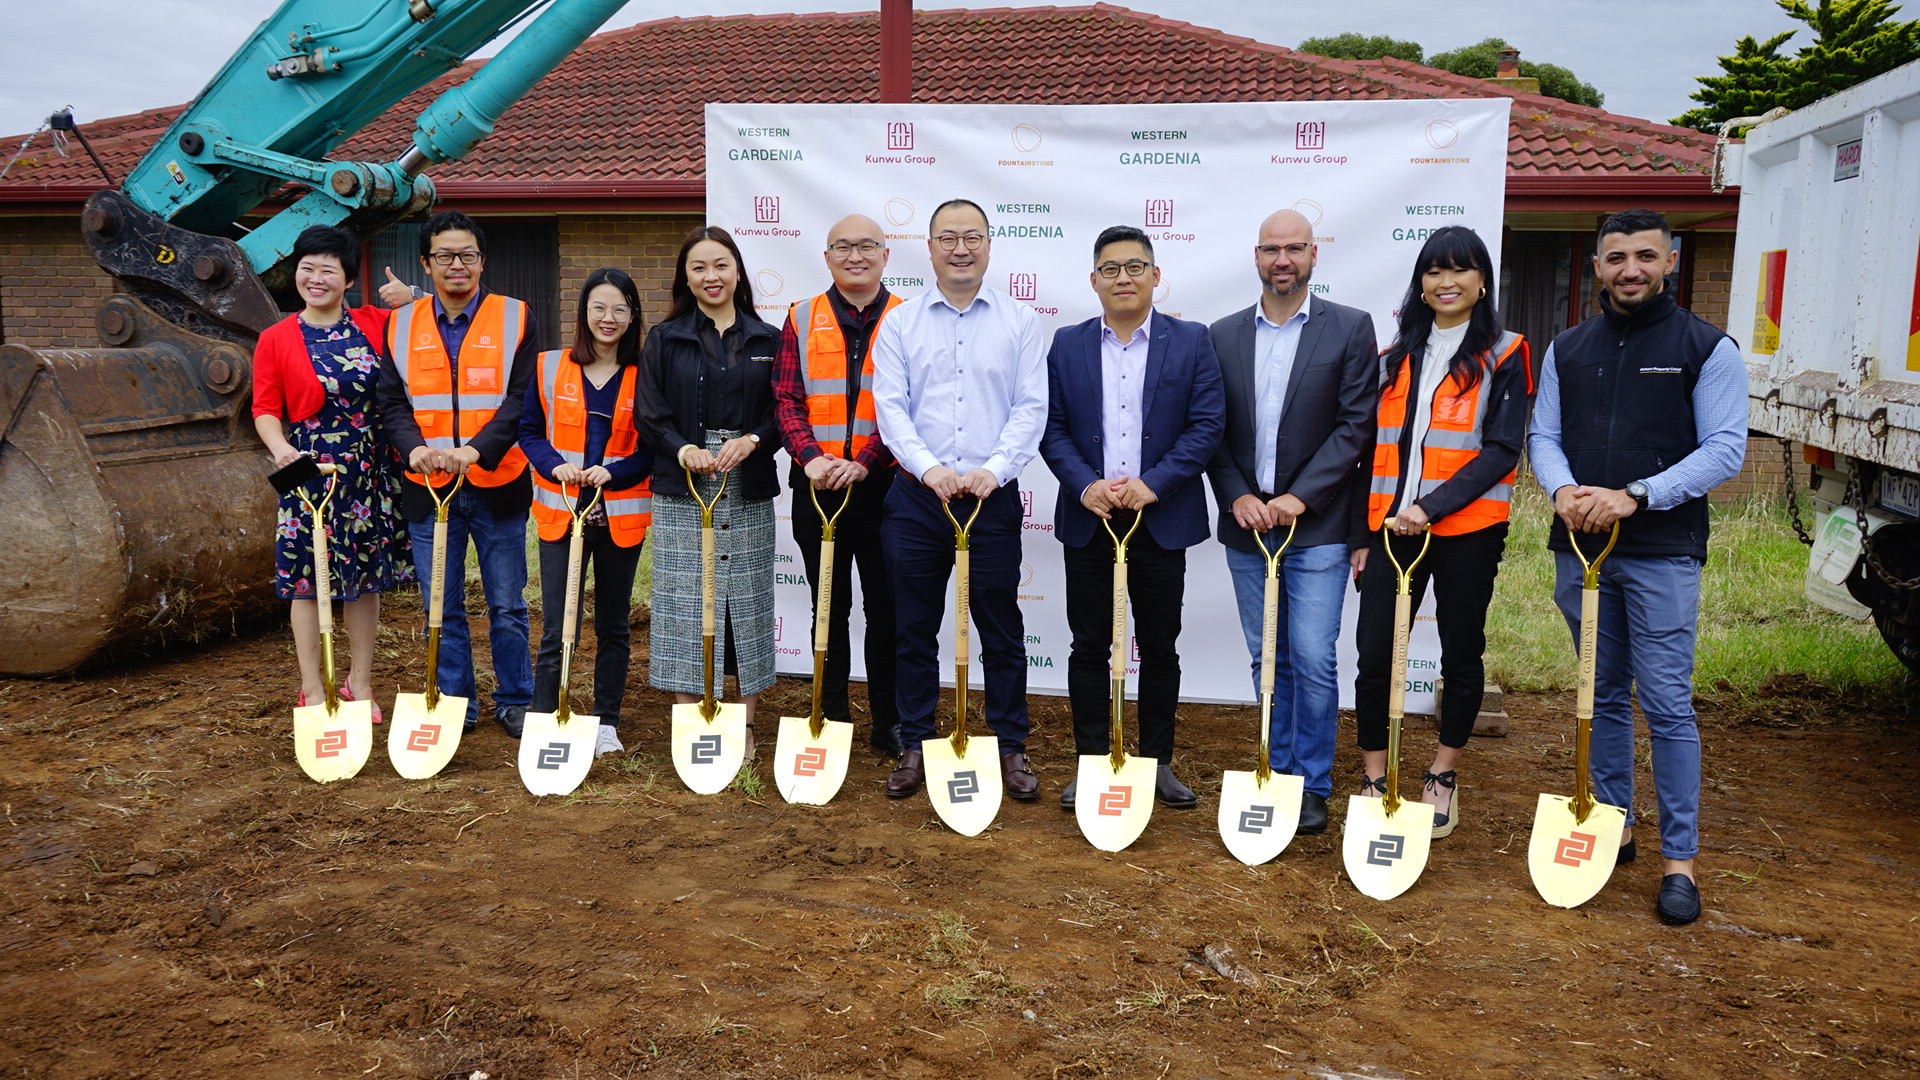 CONSTRUCTION COMMENCED AT WESTERN GARDENIA